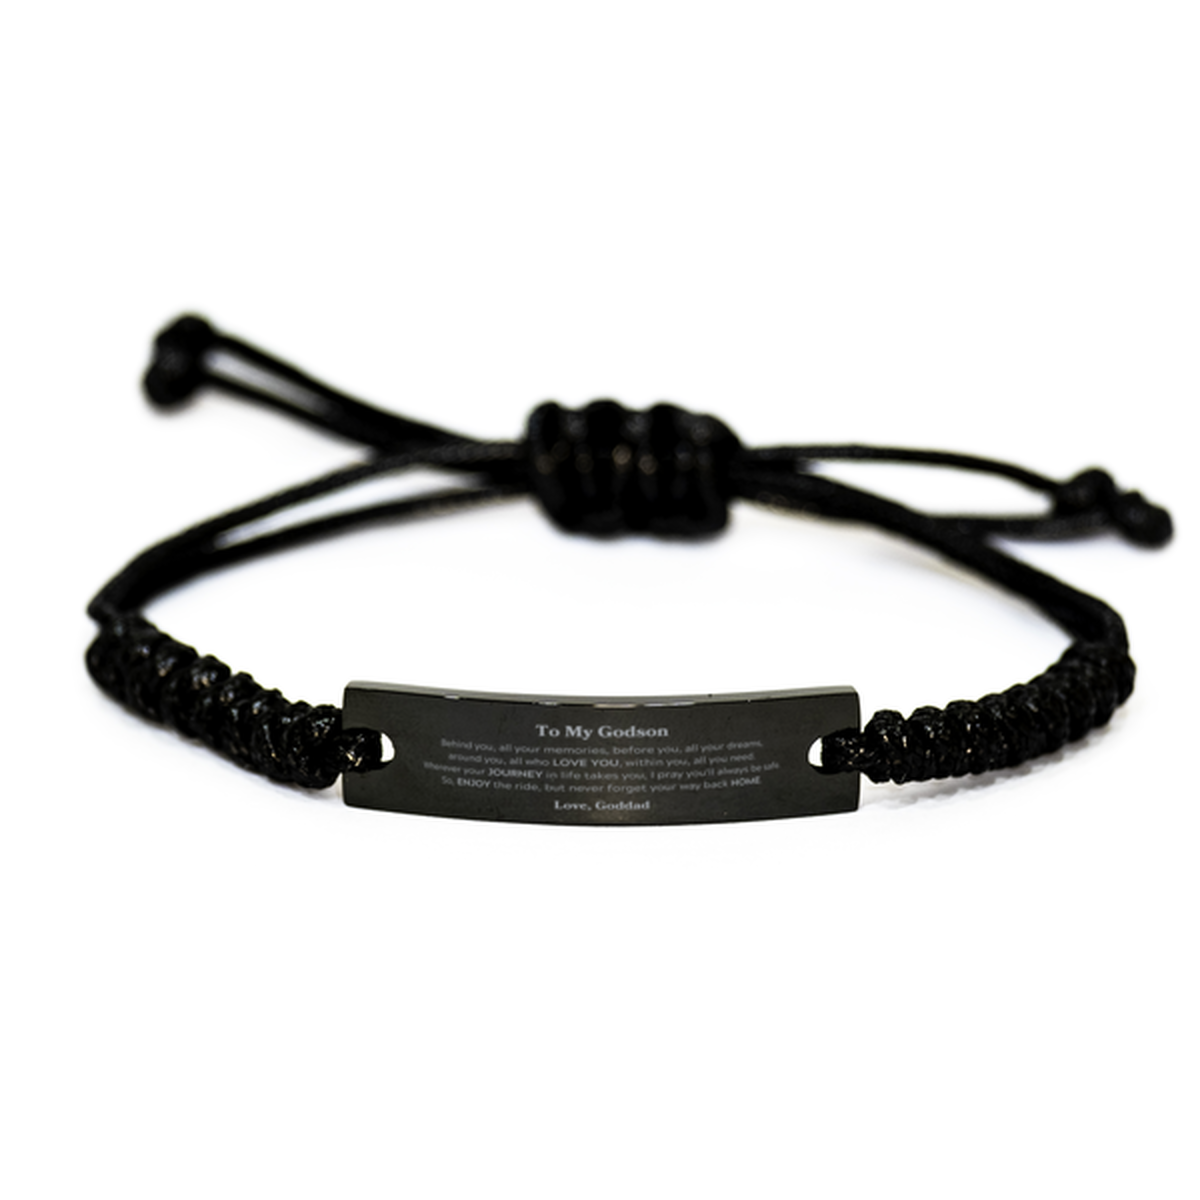 To My Godson Graduation Gifts from Goddad, Godson Black Rope Bracelet Christmas Birthday Gifts for Godson Behind you, all your memories, before you, all your dreams. Love, Goddad